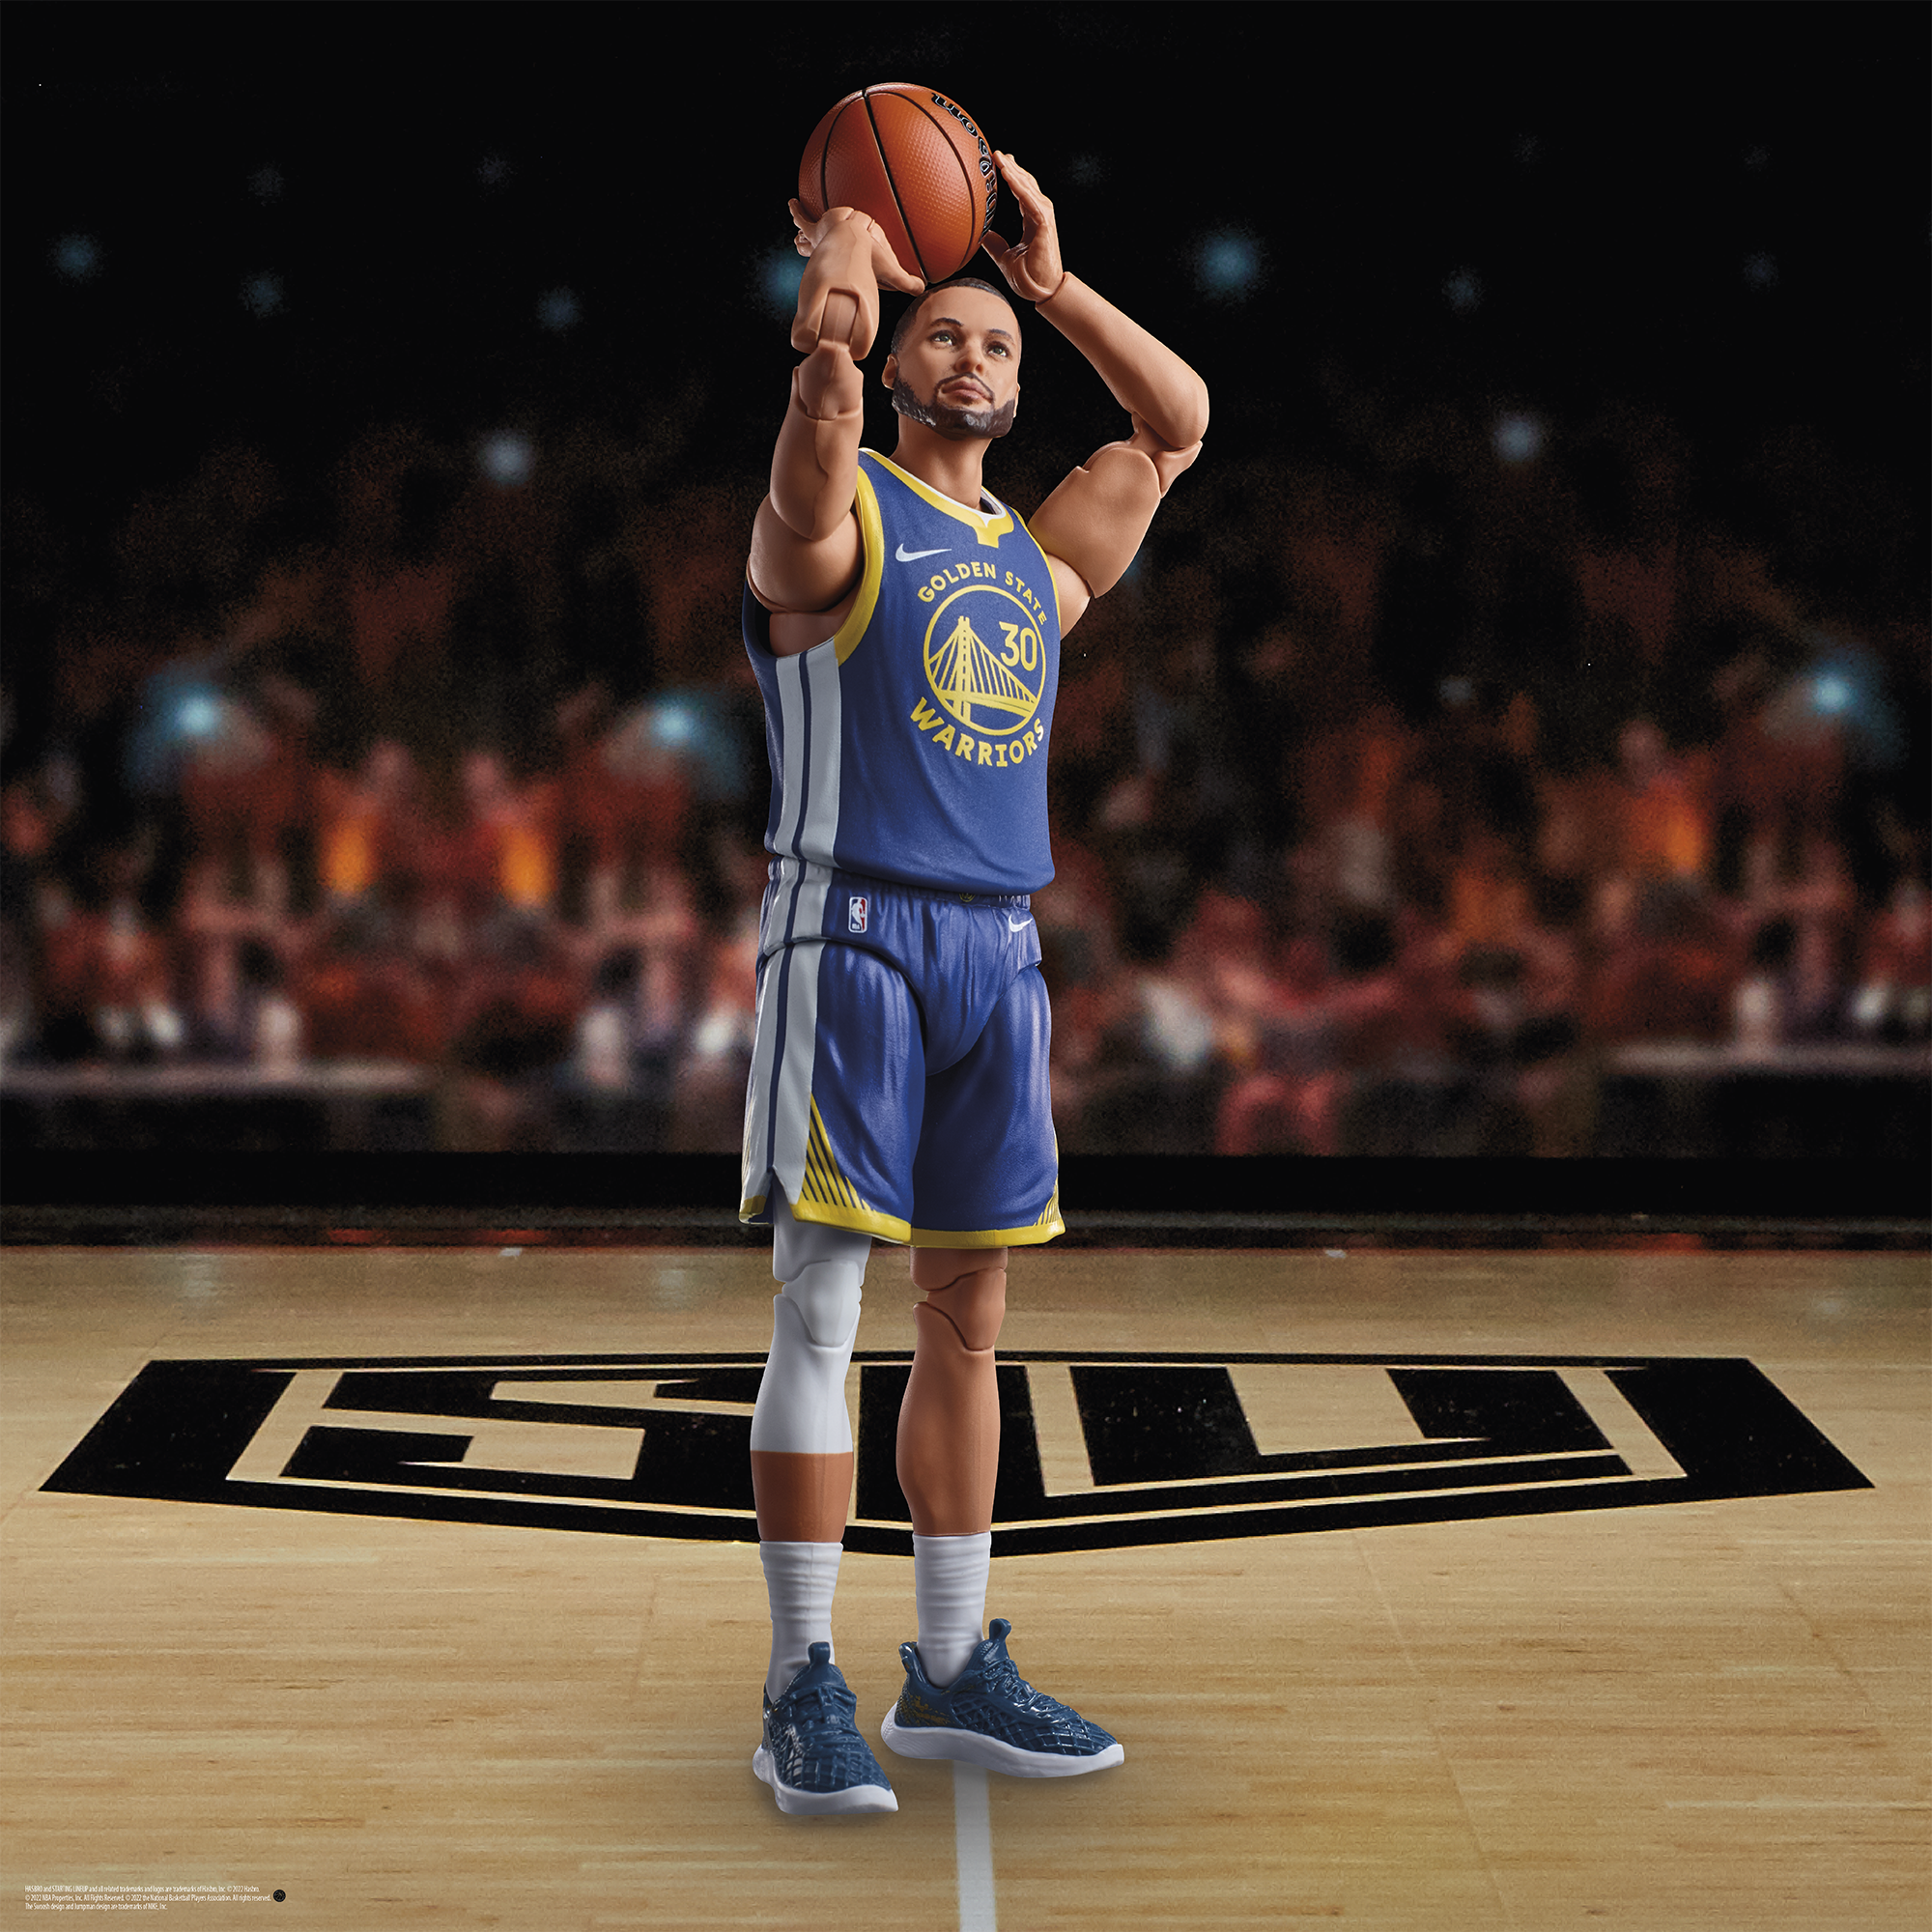 Wallpaper Of Stephen Curry Playing Basketball  Wallpapers   DesiCommentscom